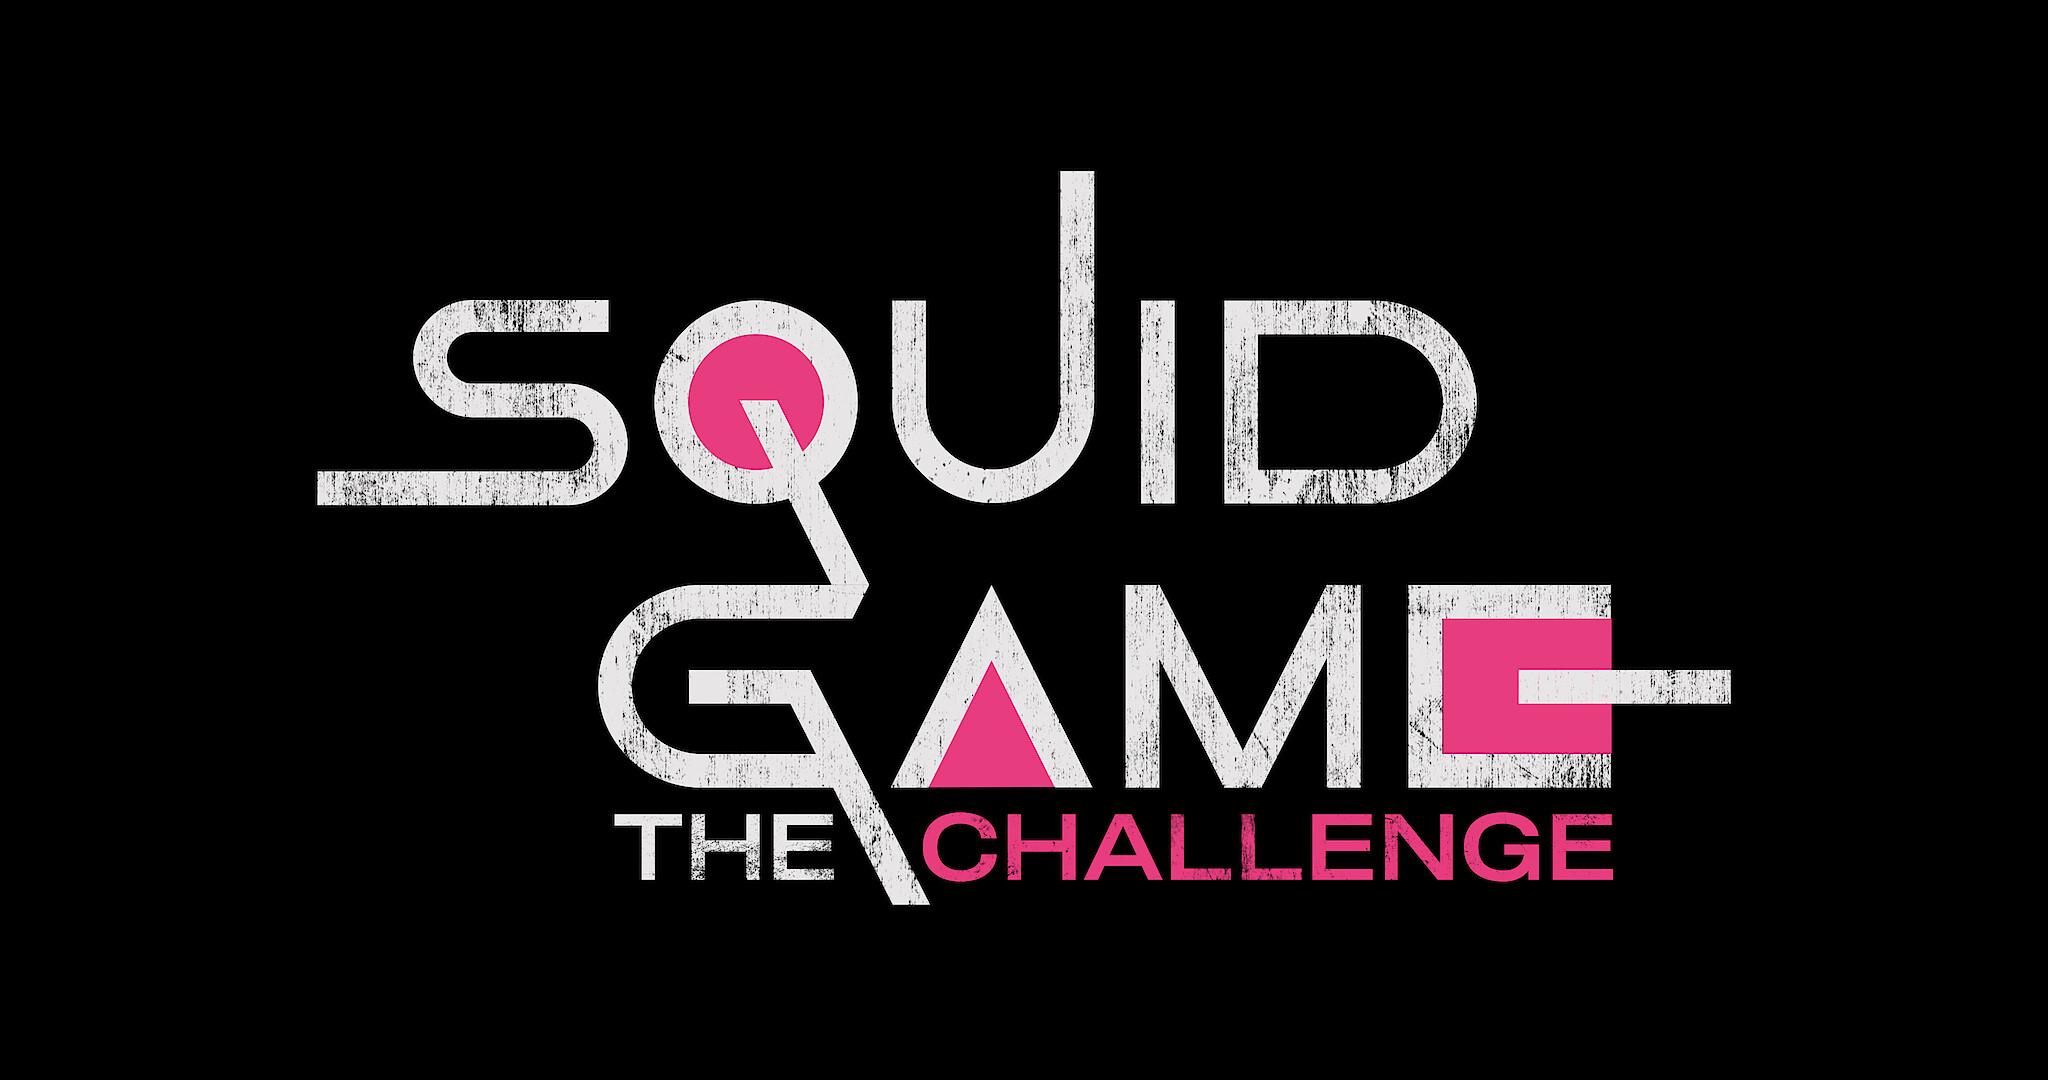 Who Is Phill From Squid Game: The Challenge? Job, Age & Where Is He Now -  Capital